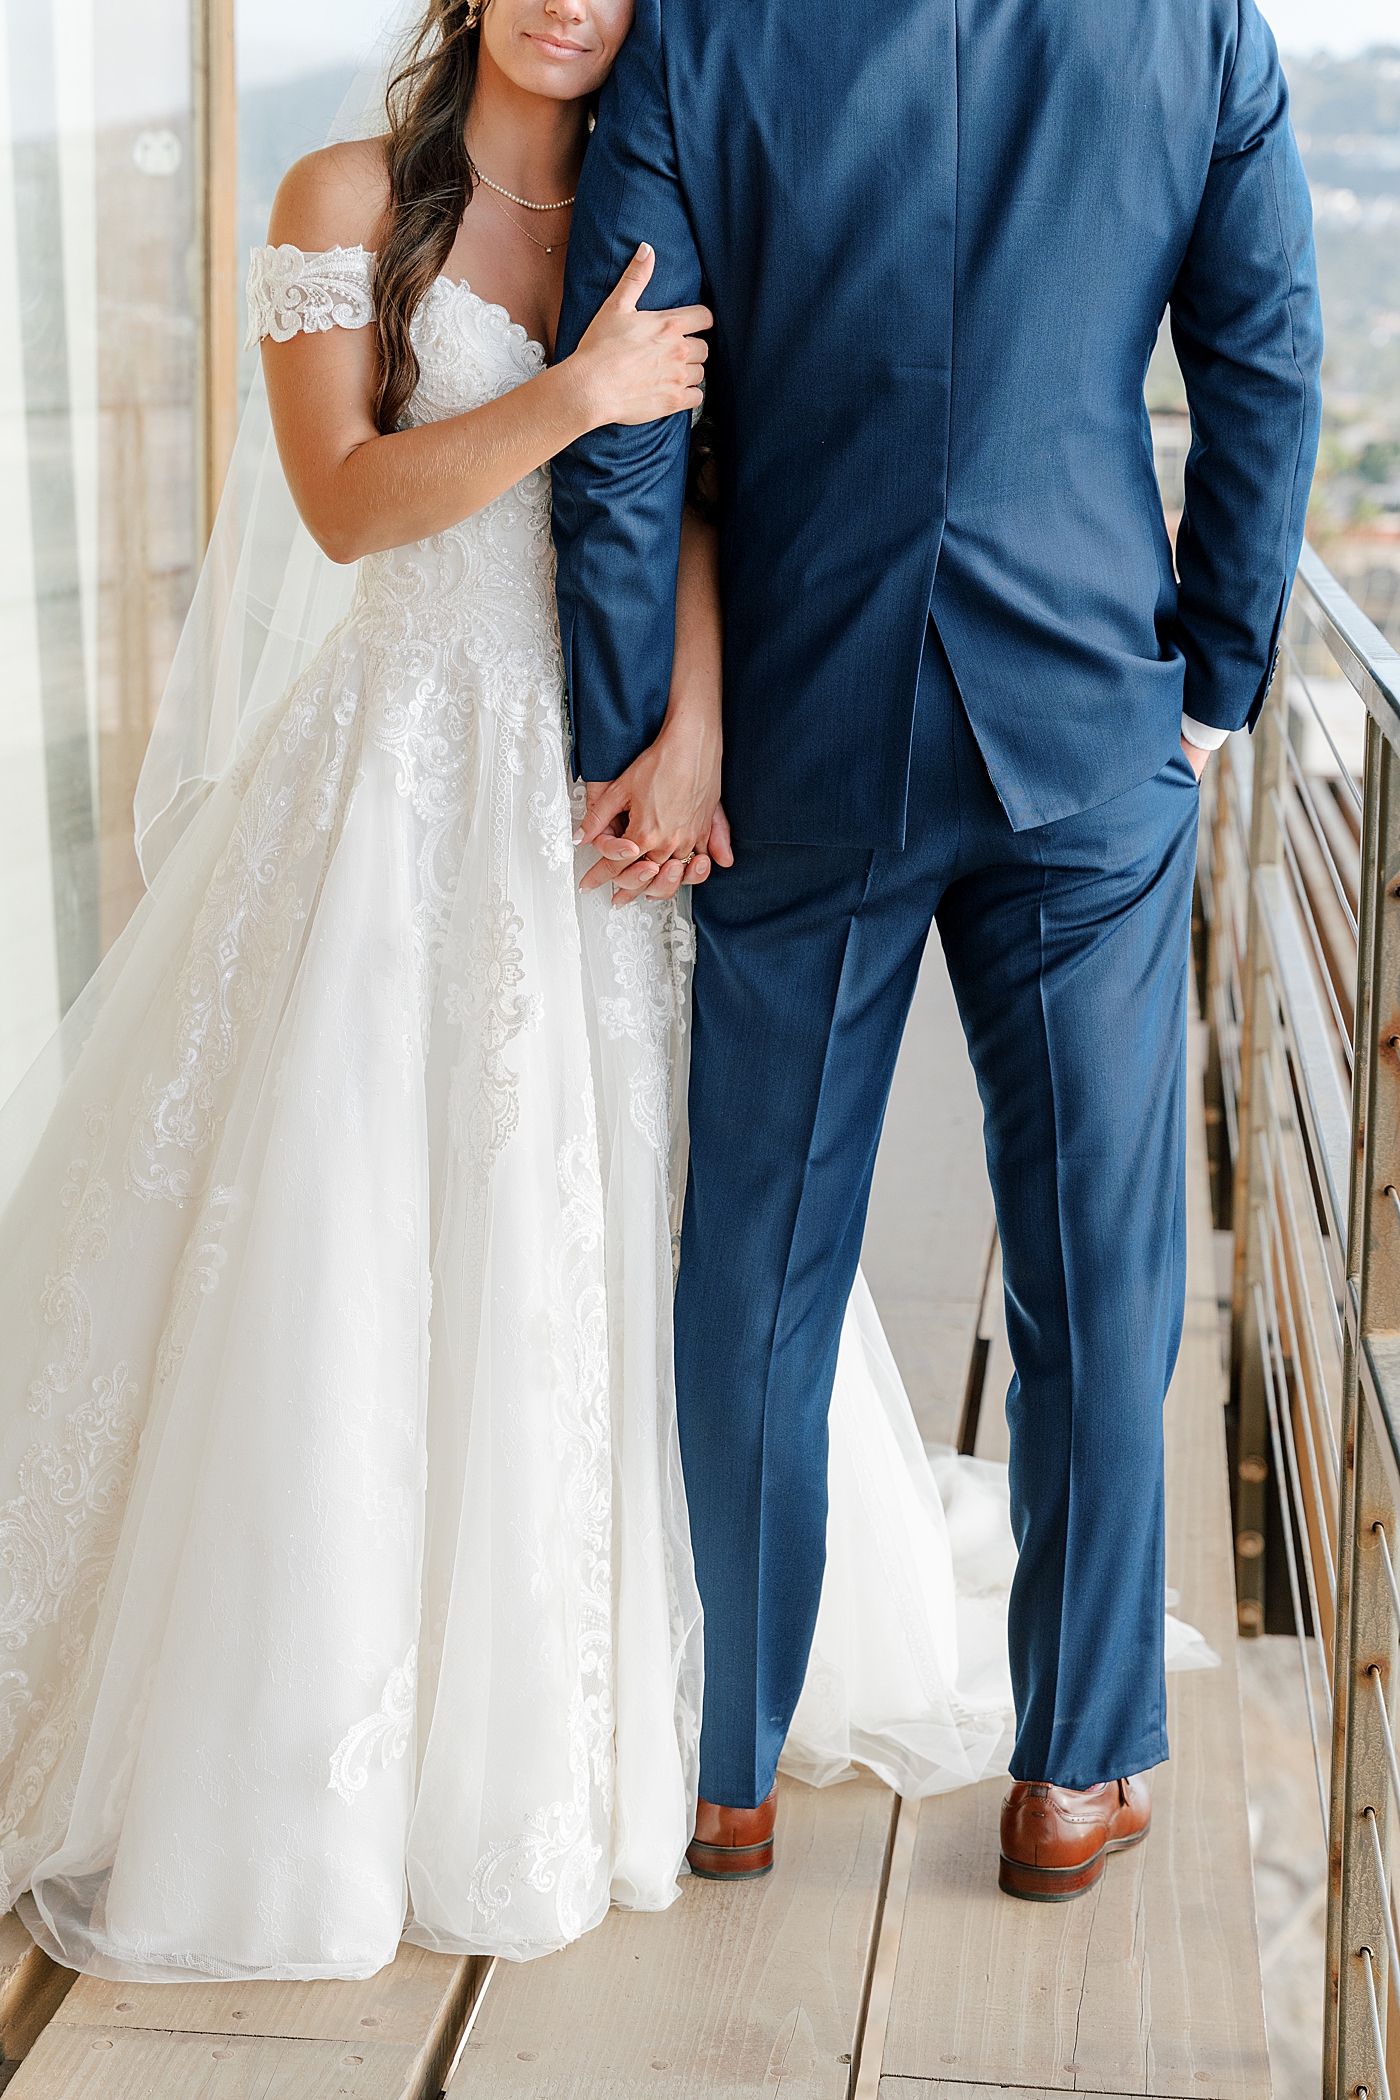 Vignette of a groom in navy suit and bride in wedding dress holding hands. The bride is facing the camera with her head on the shoulder of the groom who is facing away from the camera | Image by San Diego Wedding Photographer Hope Helmuth